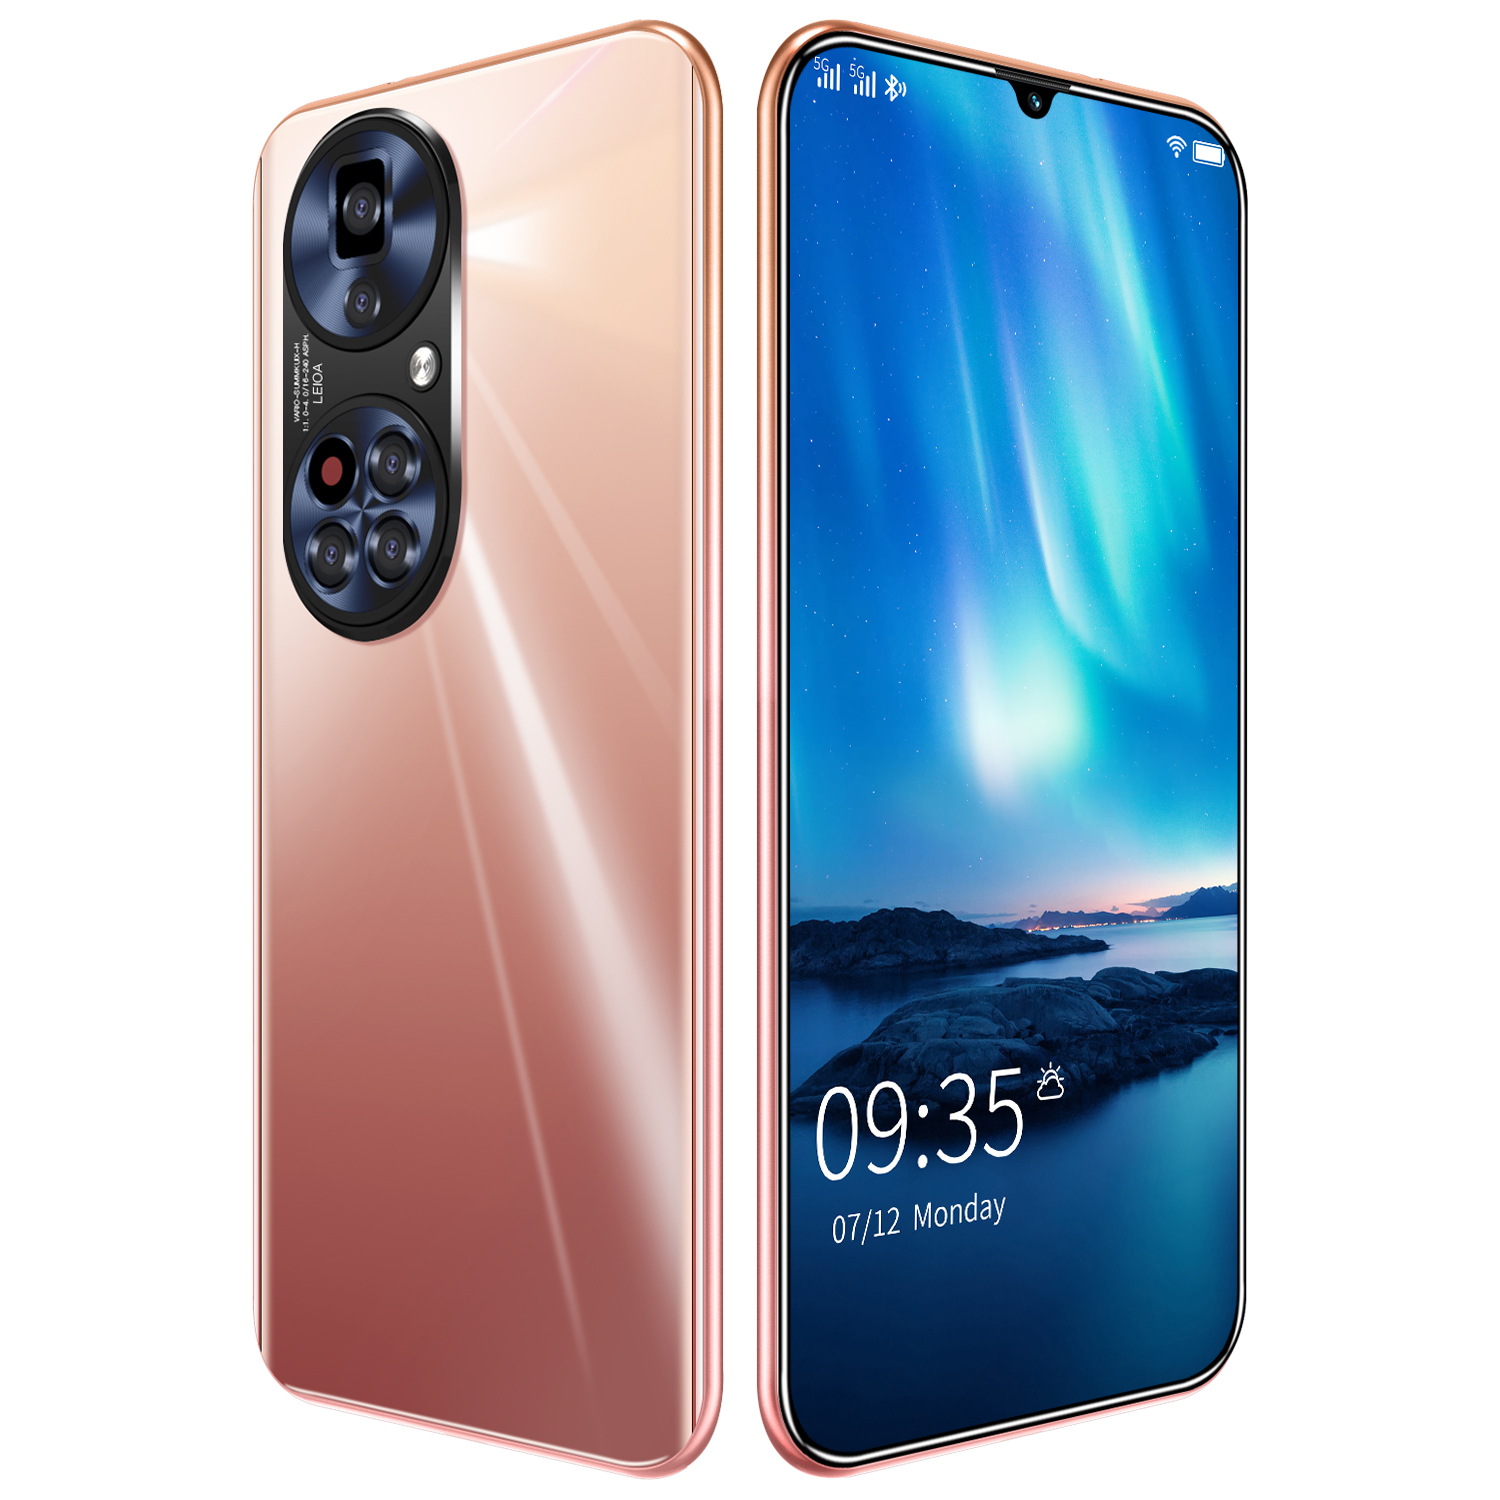 Huawei P60 Pro specs, price and features SpecificationsPro